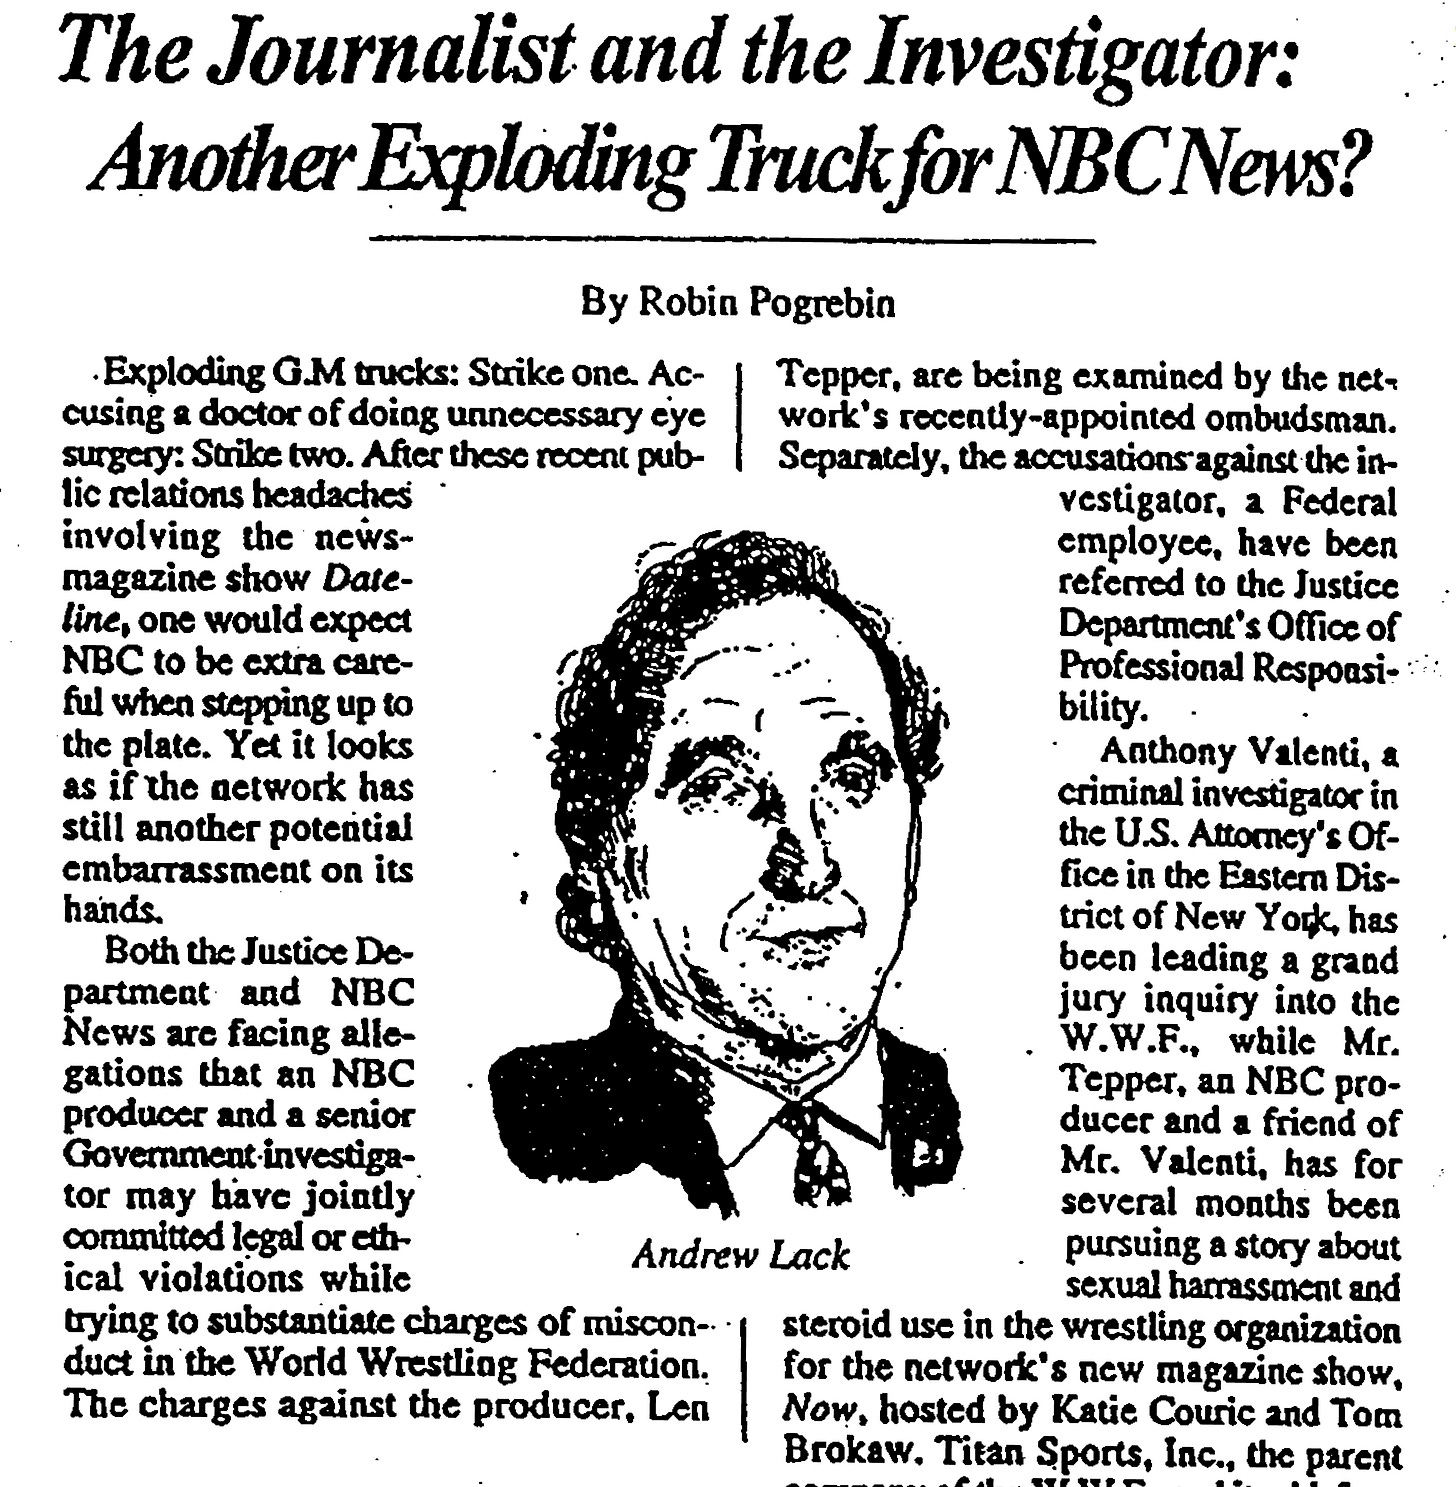 The opening portion of Robin Pogrebin’s story about the WWF, NBC News, and the Department of Justice in the September 13, 1993 issue of the New York Observer. (Image source: Federal court records.)